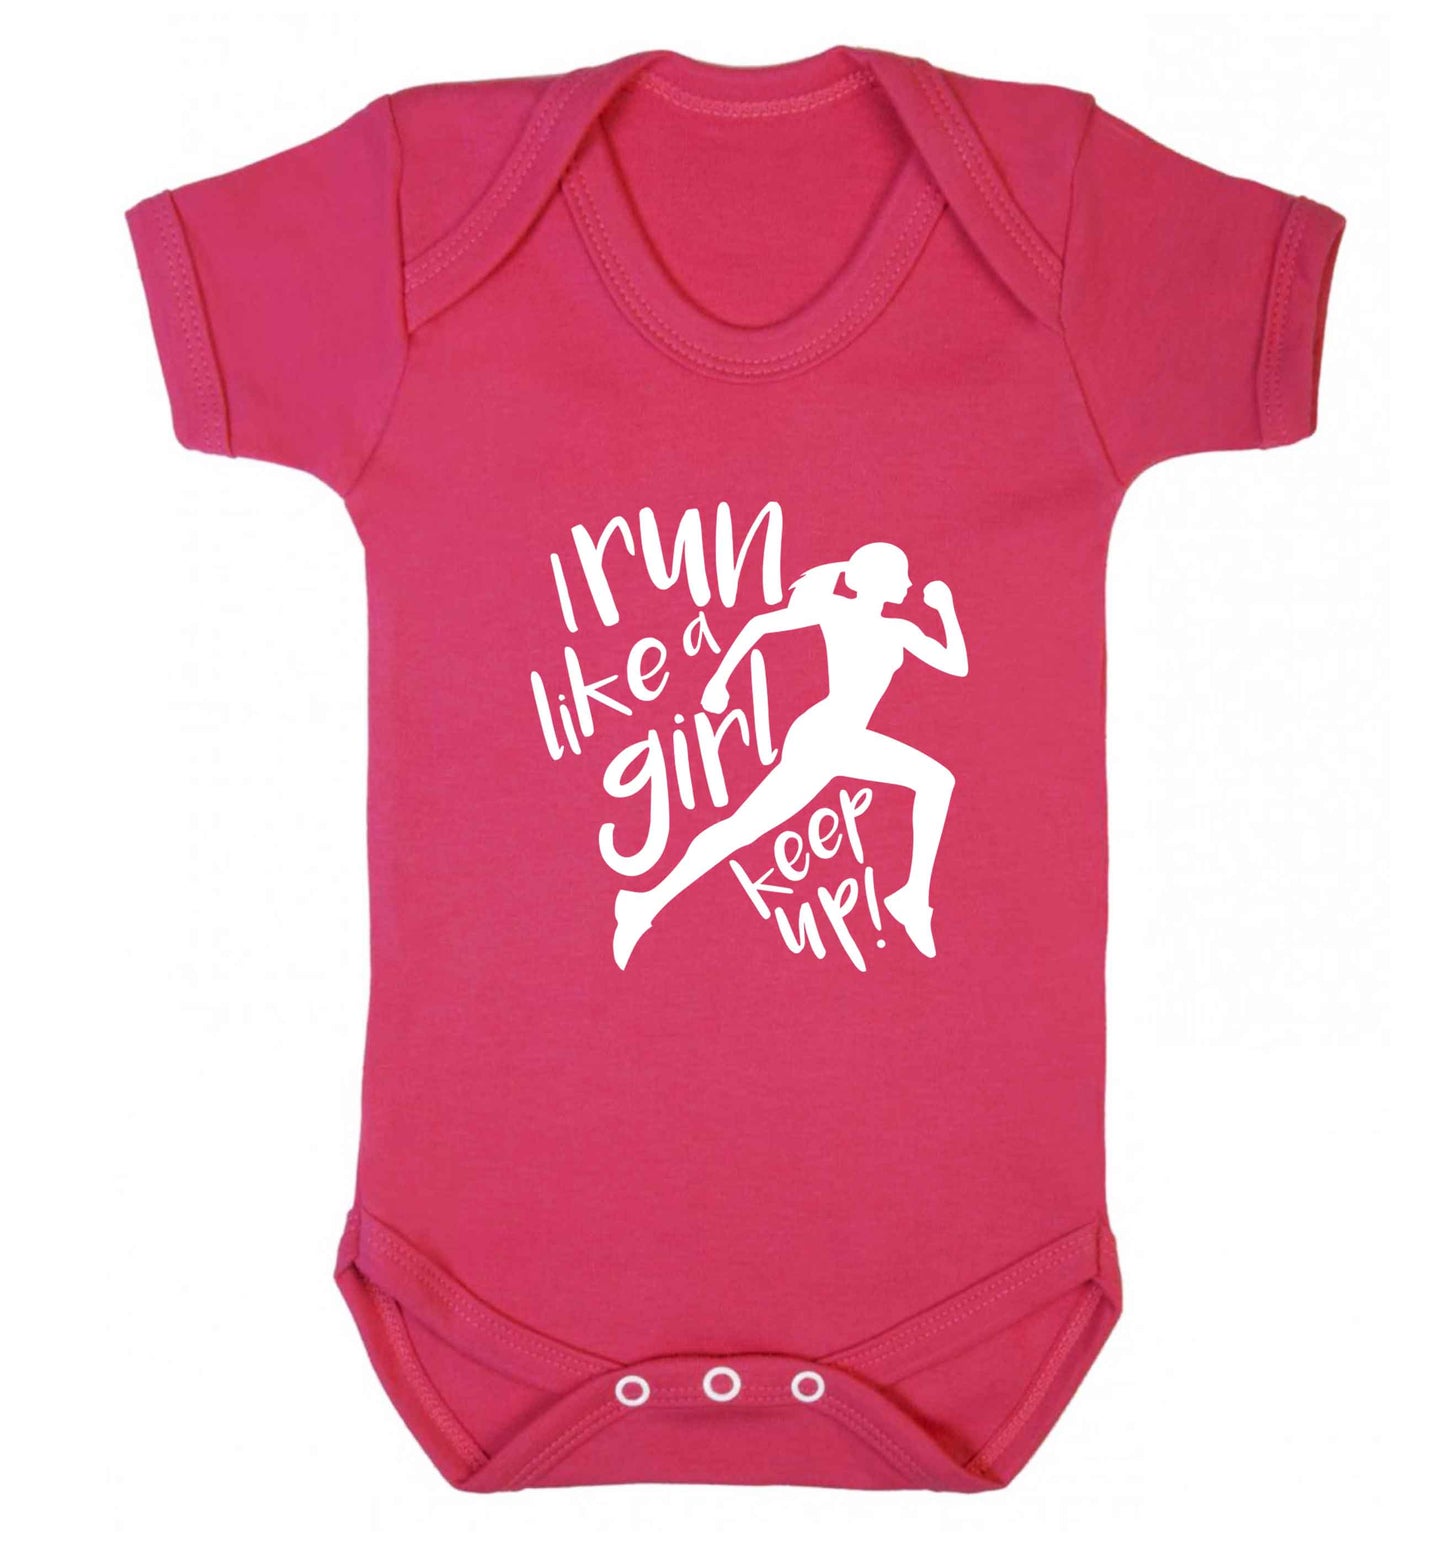 I run like a girl, keep up! baby vest dark pink 18-24 months